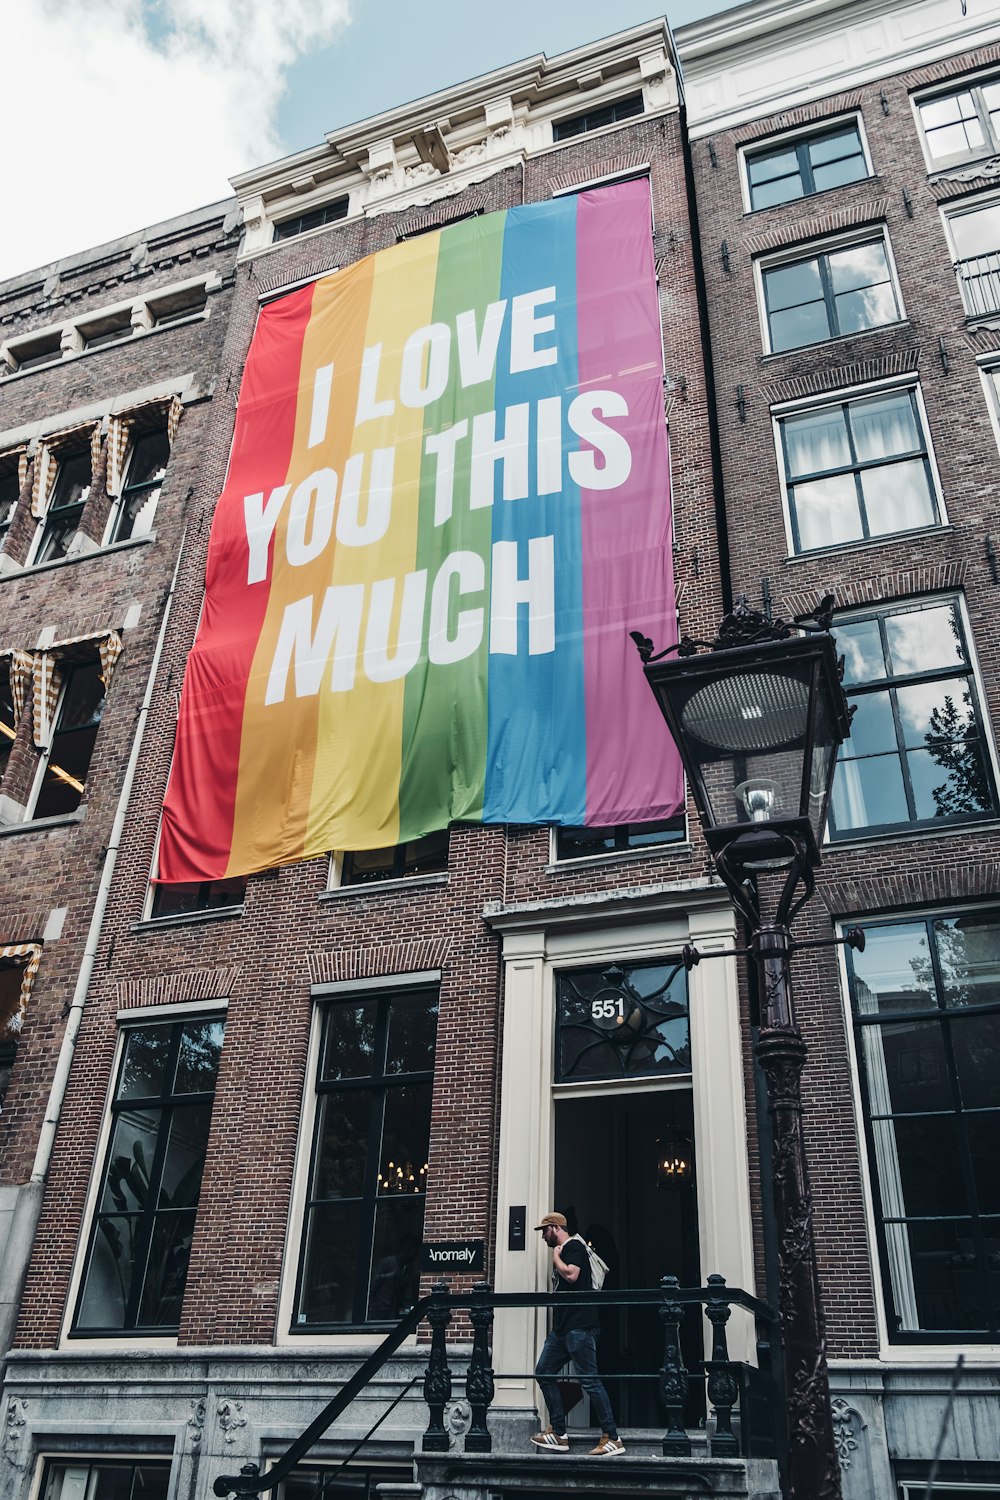 I love you this mush poster hanged on brown painted building